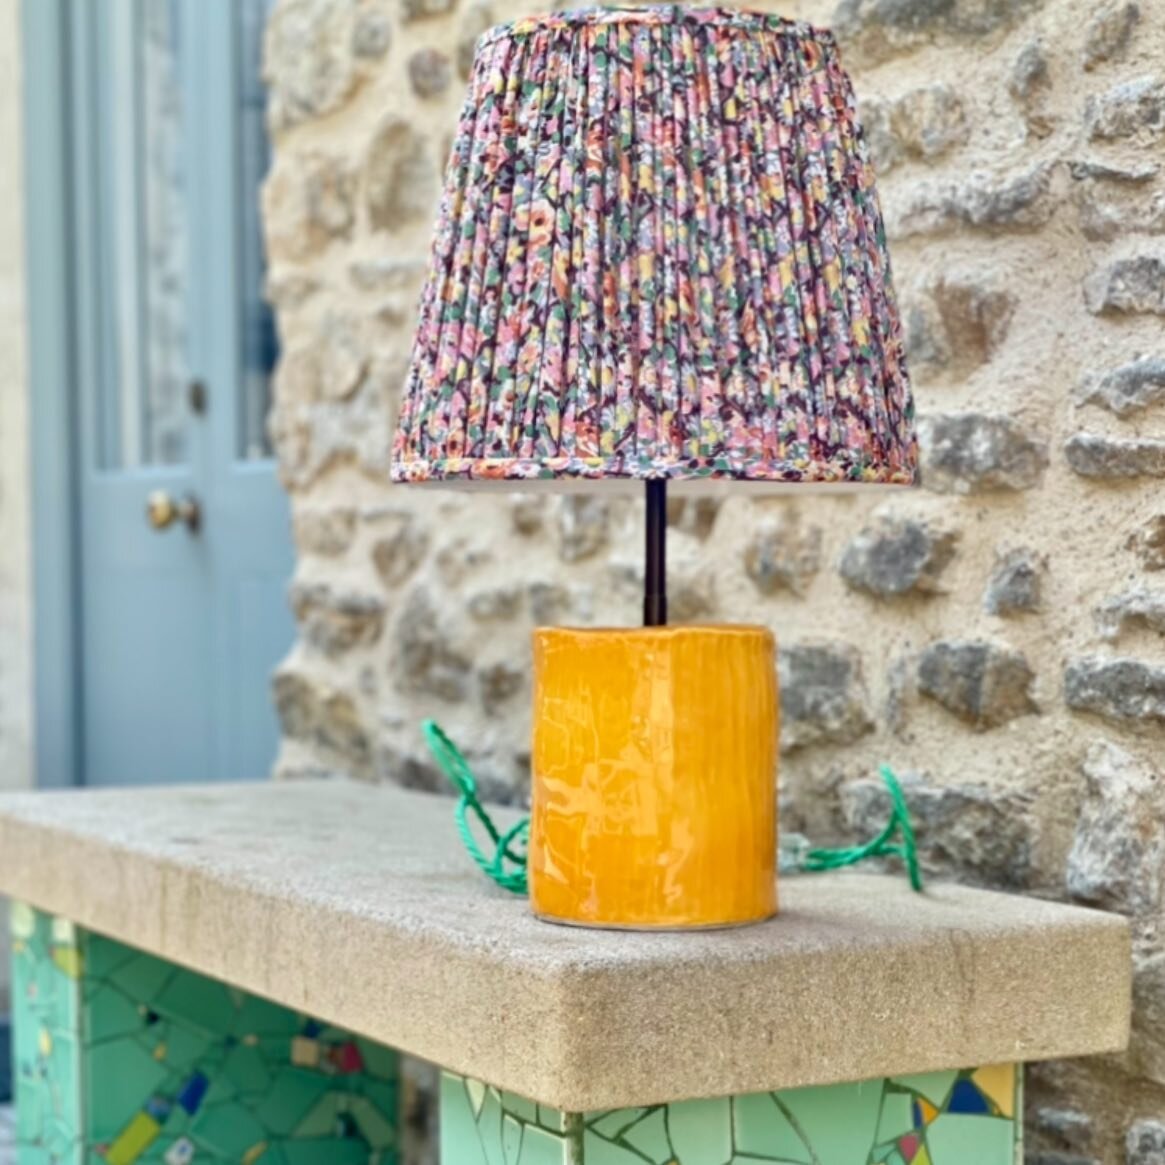 Sunshine on a rainy day&hellip; (and a throw back to last summer)☀️ 

Bespoke made lamp made for @numberonebruton using a 1940&rsquo;s floral fabric, yolk yellow glaze &amp; a contrasting green braid flex ⚡️Beautifully &lsquo;perched&rsquo; upon one 